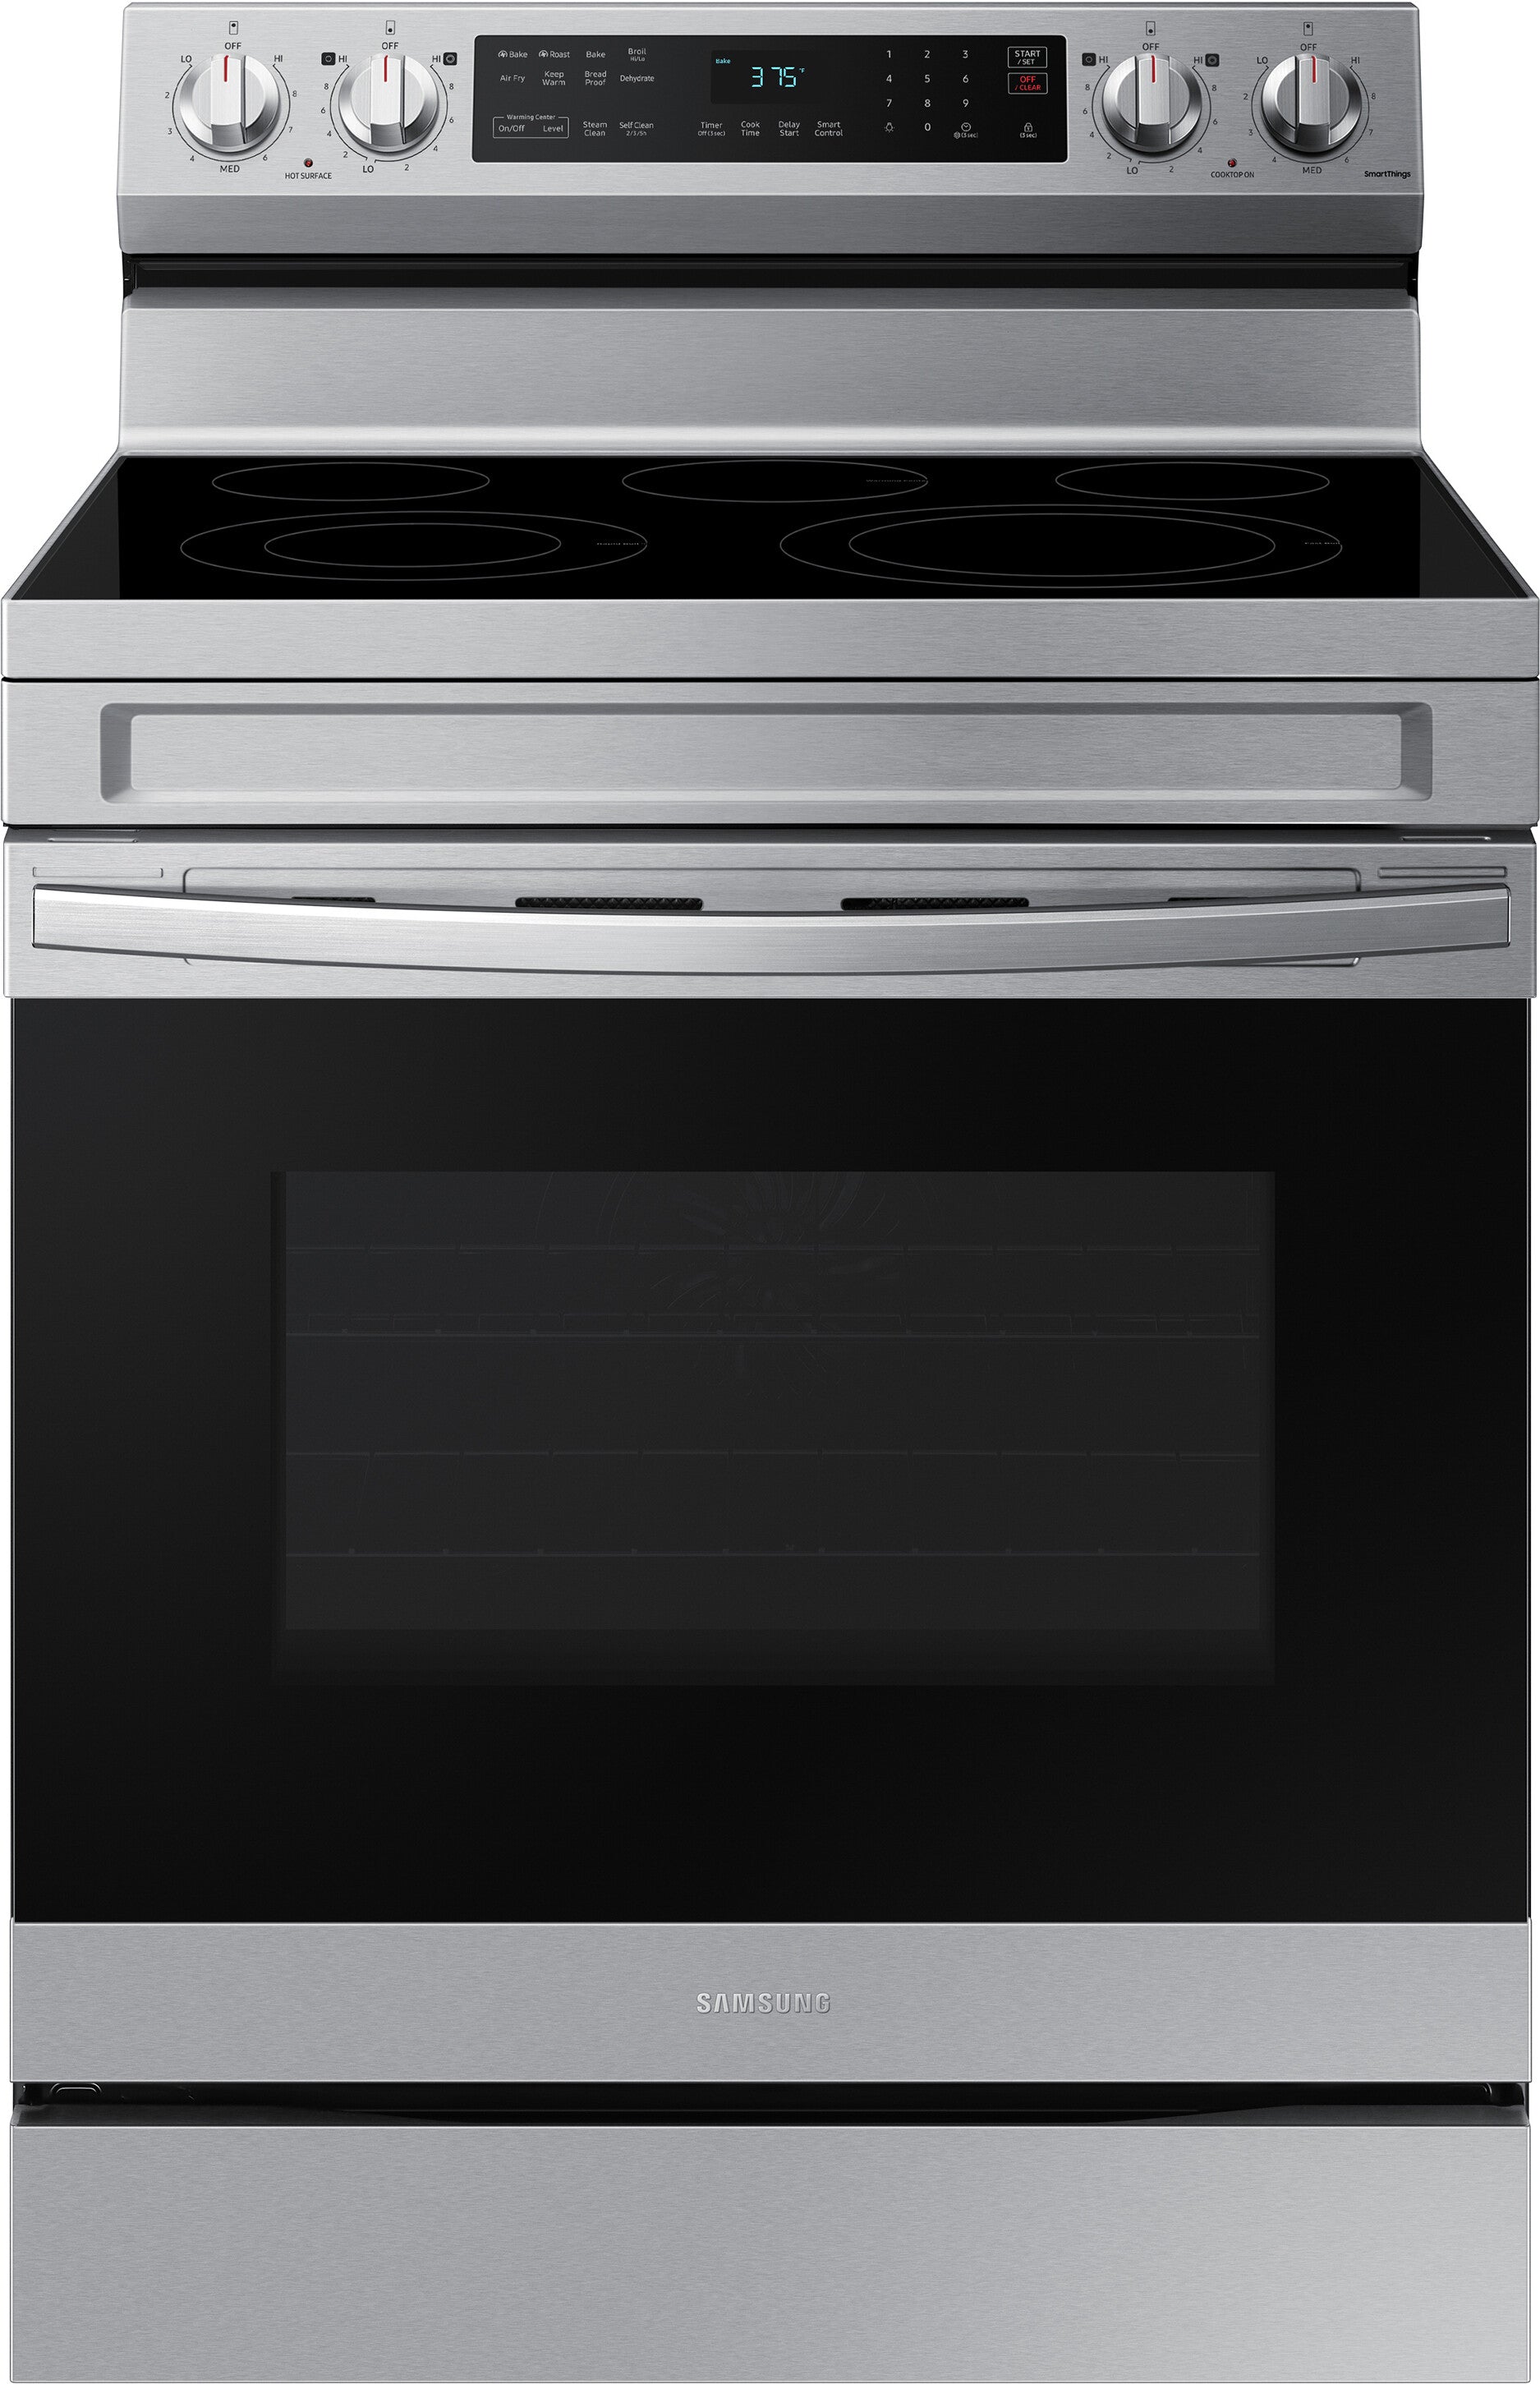 Samsung NE63A6511SS/AA 6.3 Cu. Ft. Smart Freestanding Electric Range In Stainless Steel - Samsung Parts USA